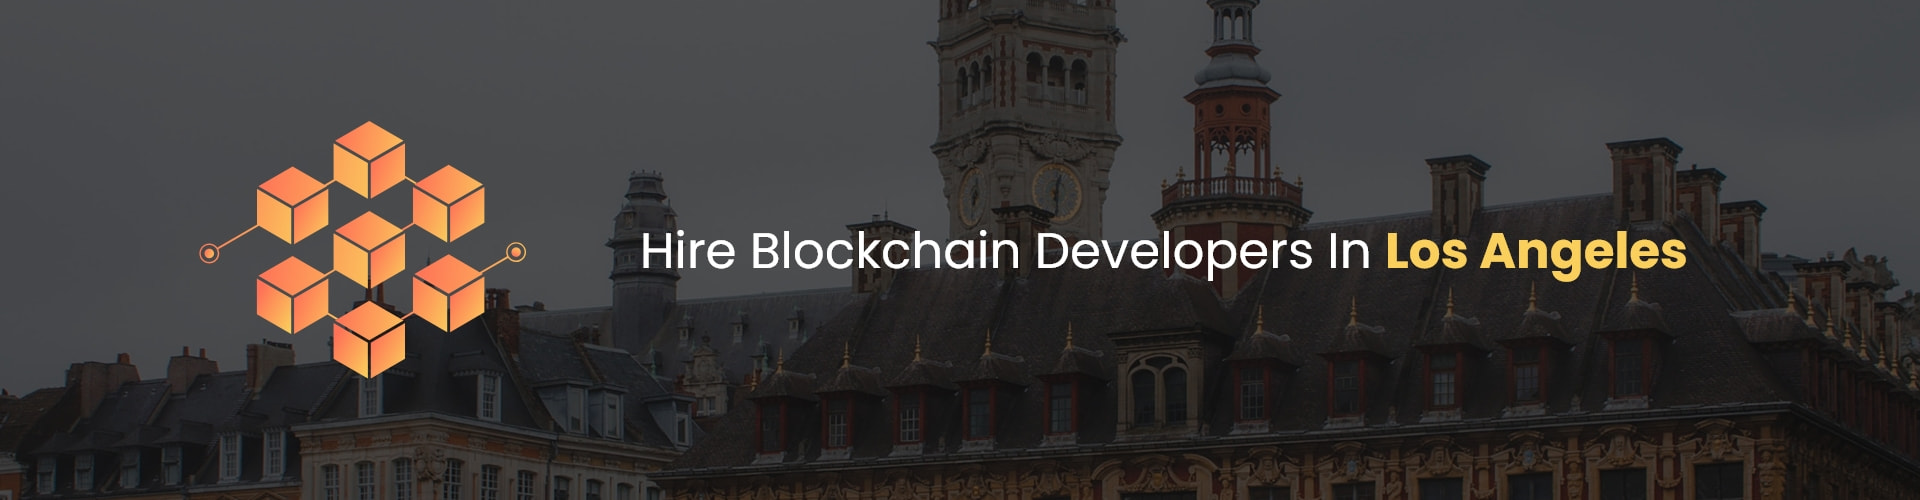 hire blockchain developers in los angeles